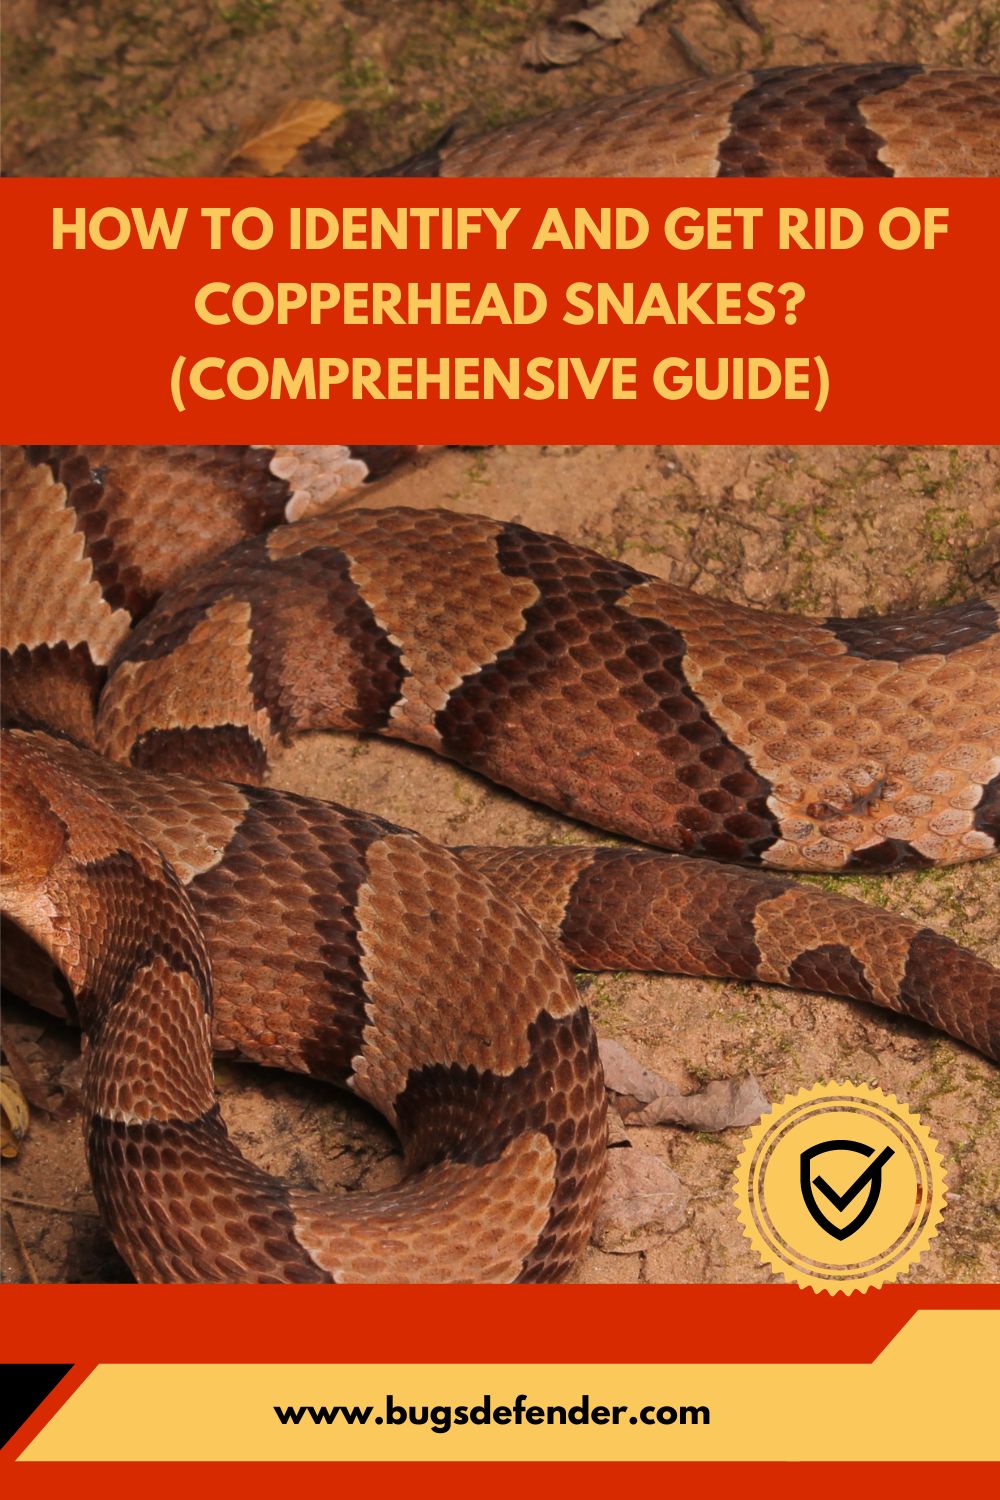 How to Identify and Get Rid of Copperhead Snakes (Comprehensive Guide) pin1